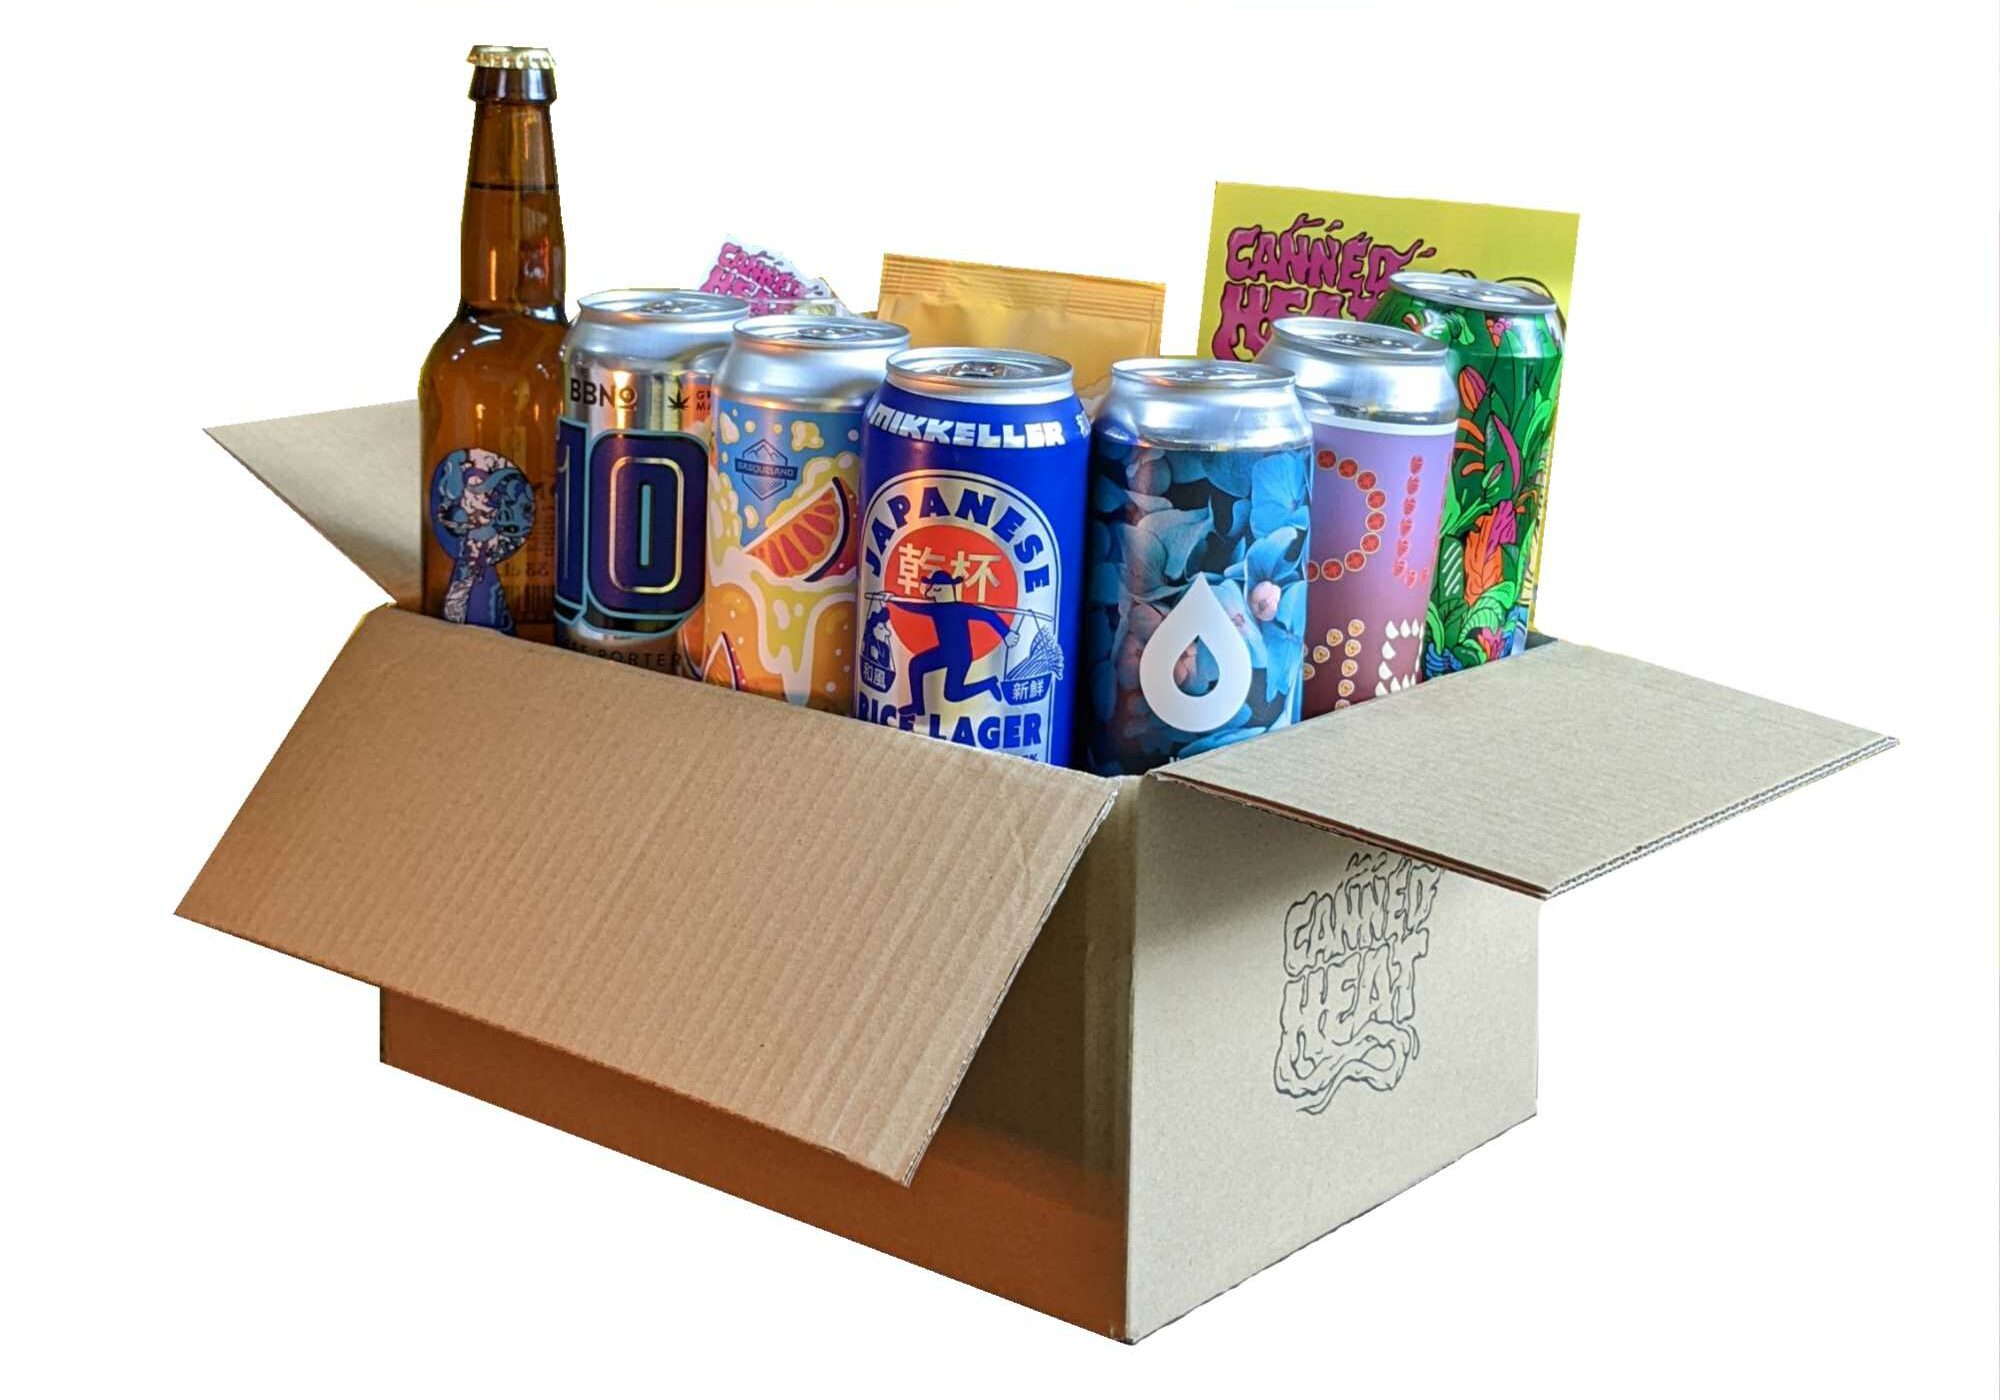 Craft Beer Monthly Subscriptions Real Ale UK England Alcohol Delivery Gift Box